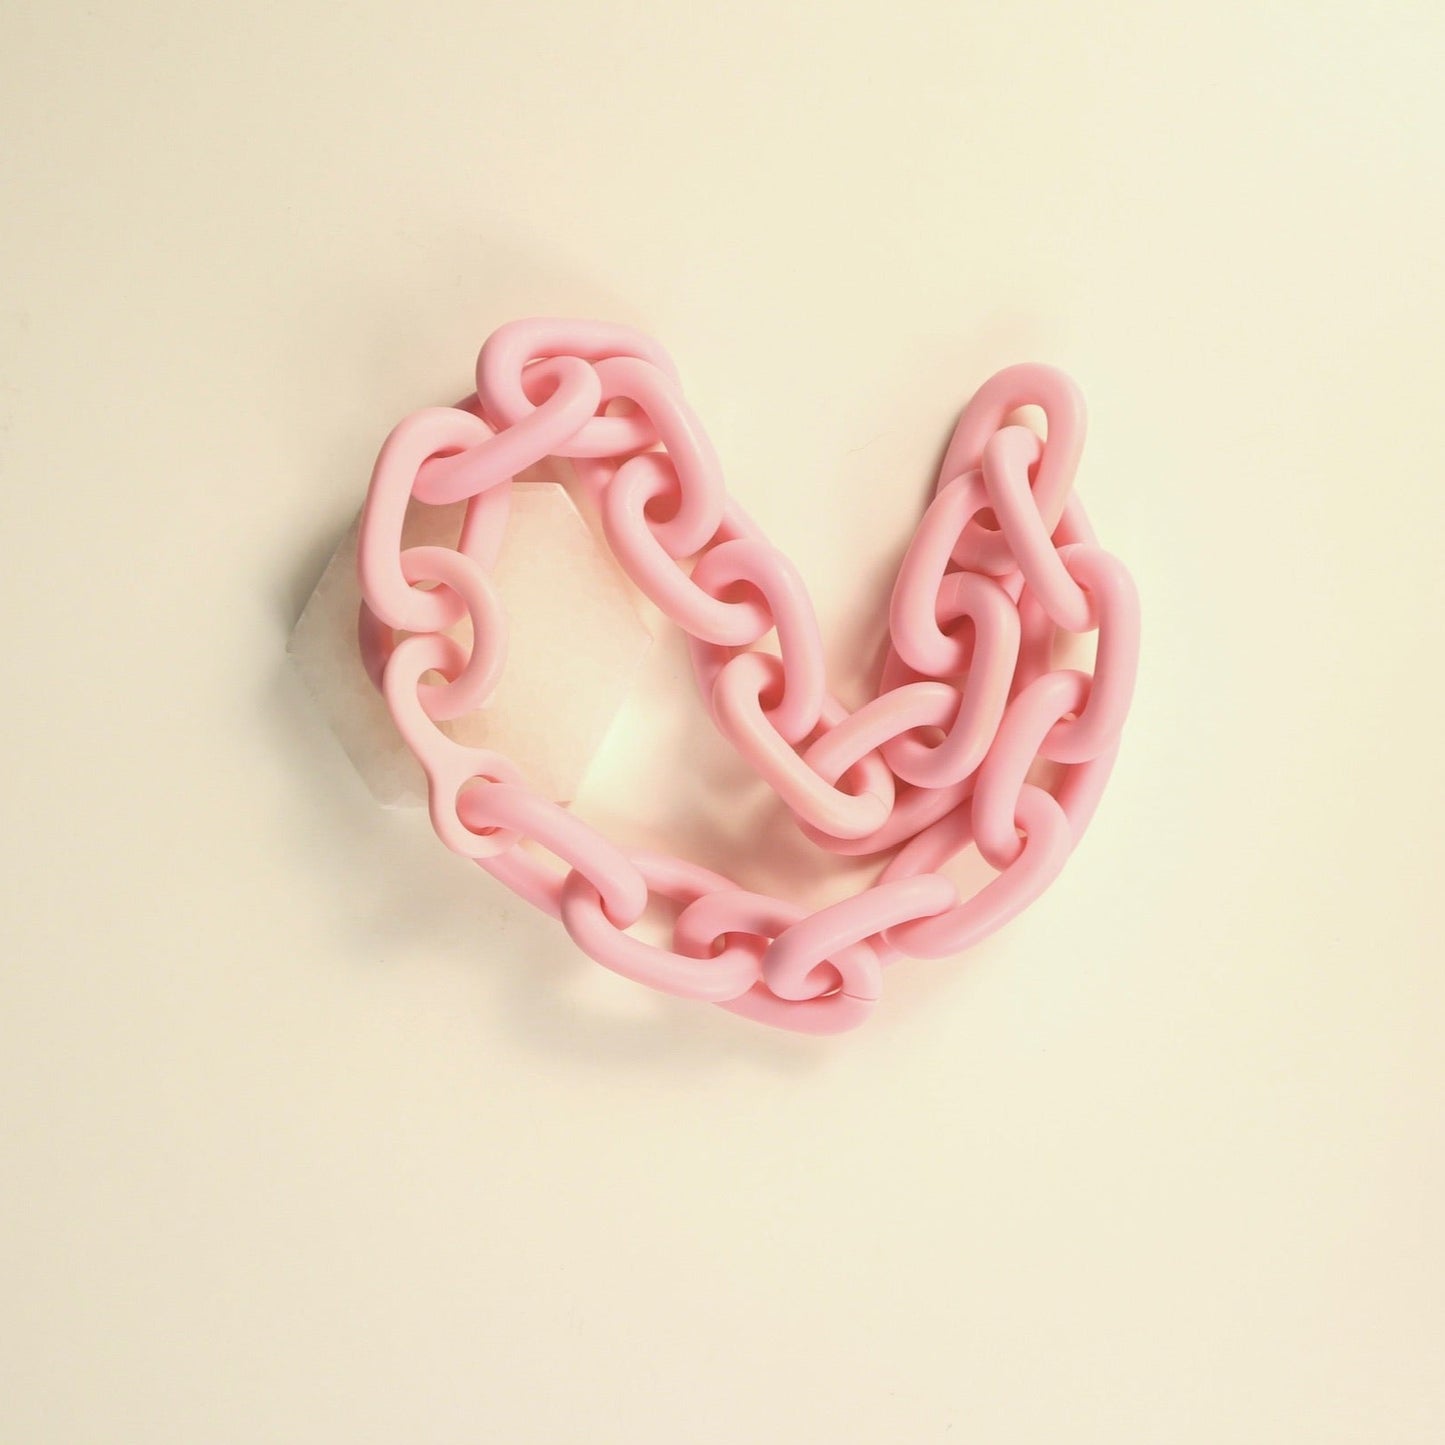 Medium Chain Resin Necklace - Baby Pink